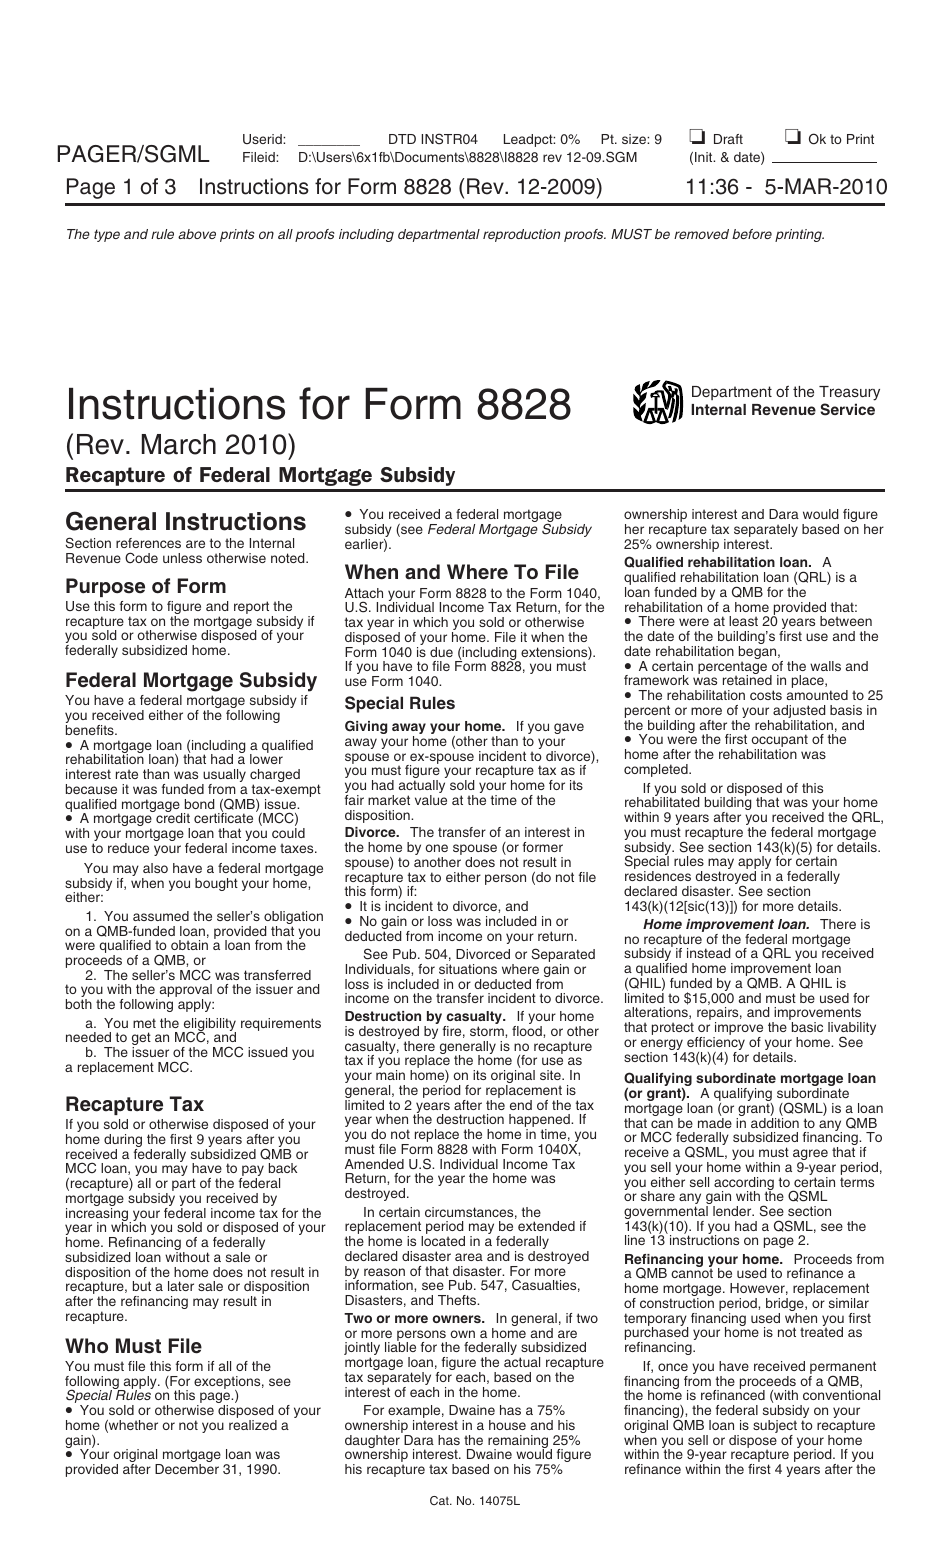 Instructions for IRS Form 8828 Recapture of Federal Mortgage Subsidy, Page 1